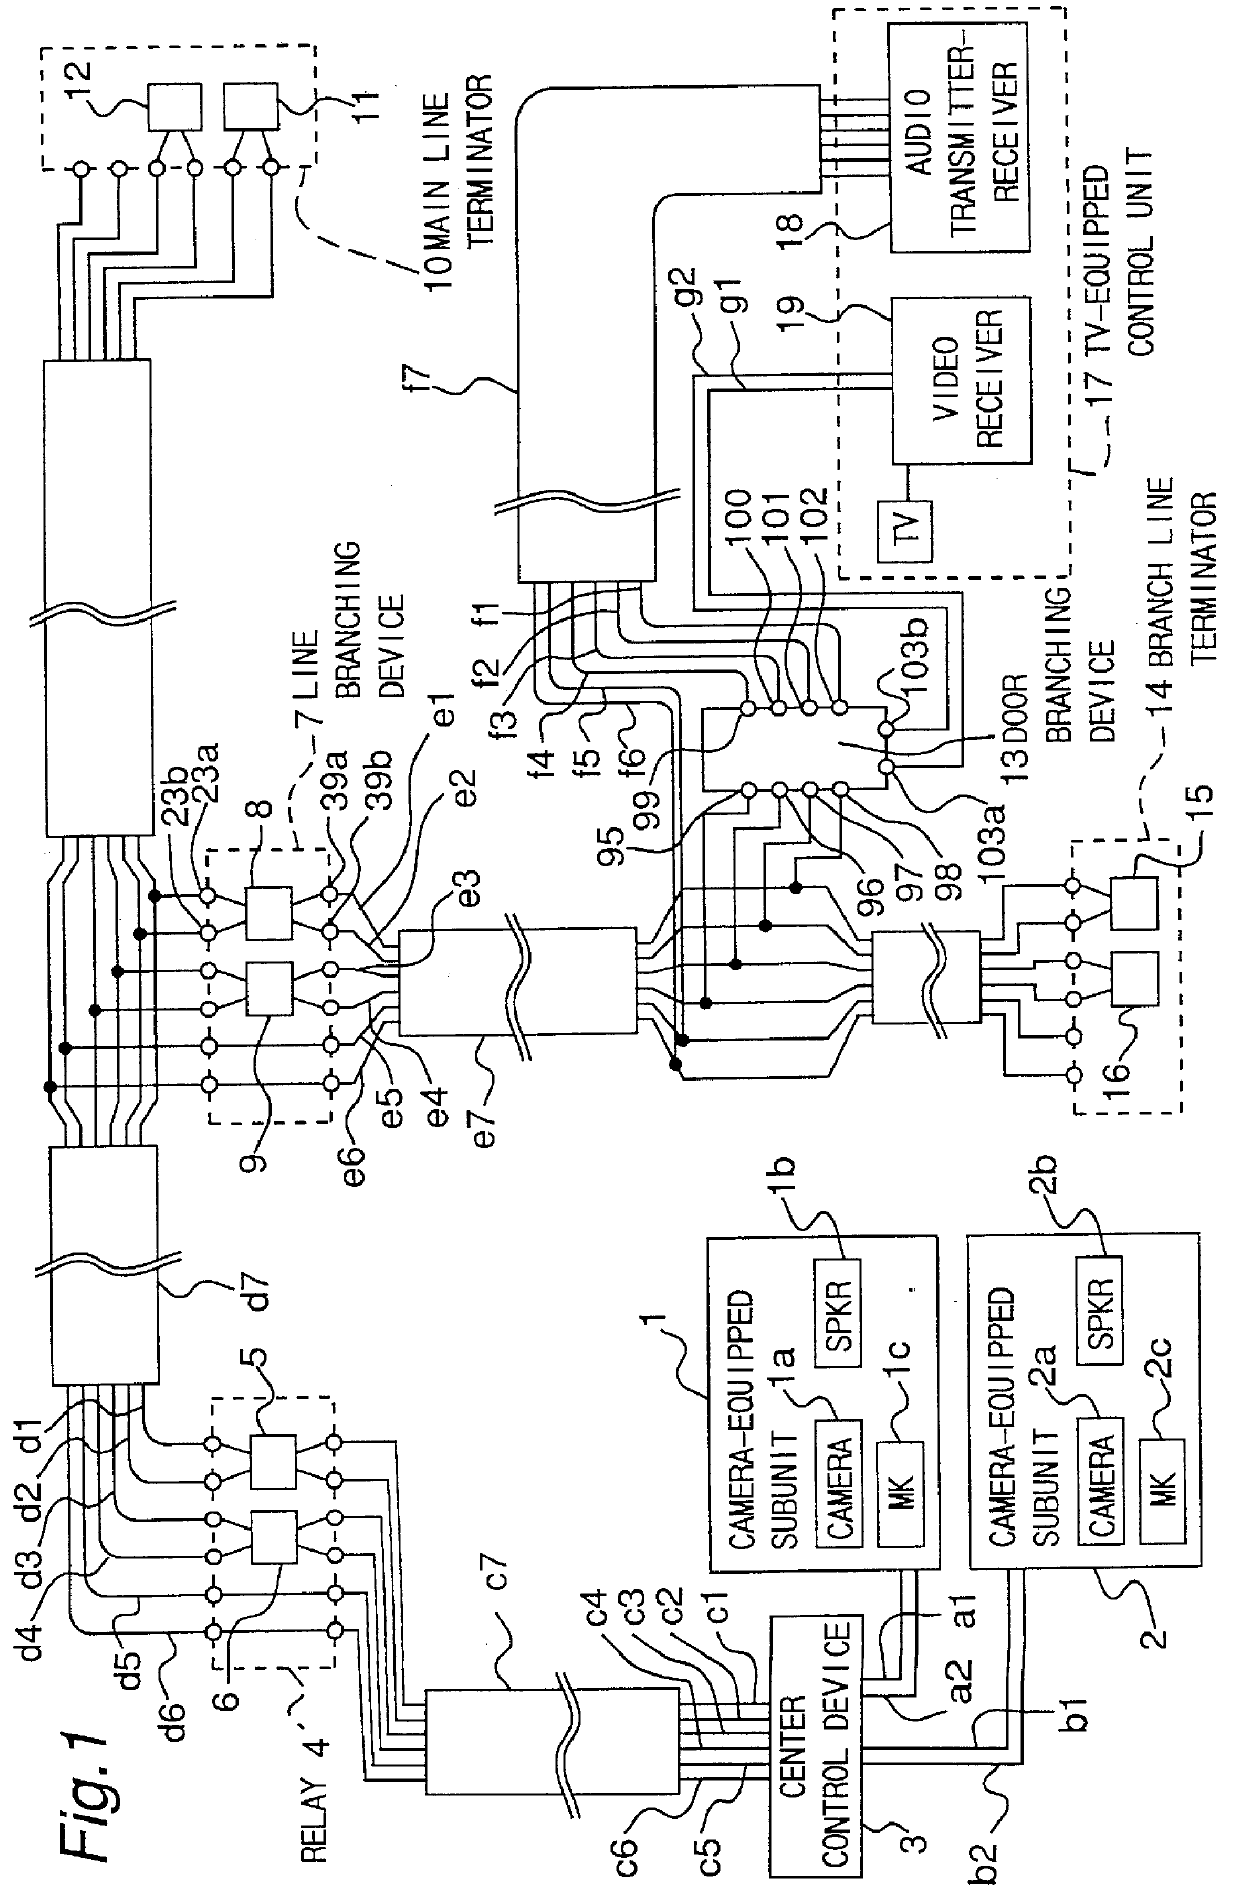 Loop detector of a branching device for a multiplexed audio-video signal transmission system